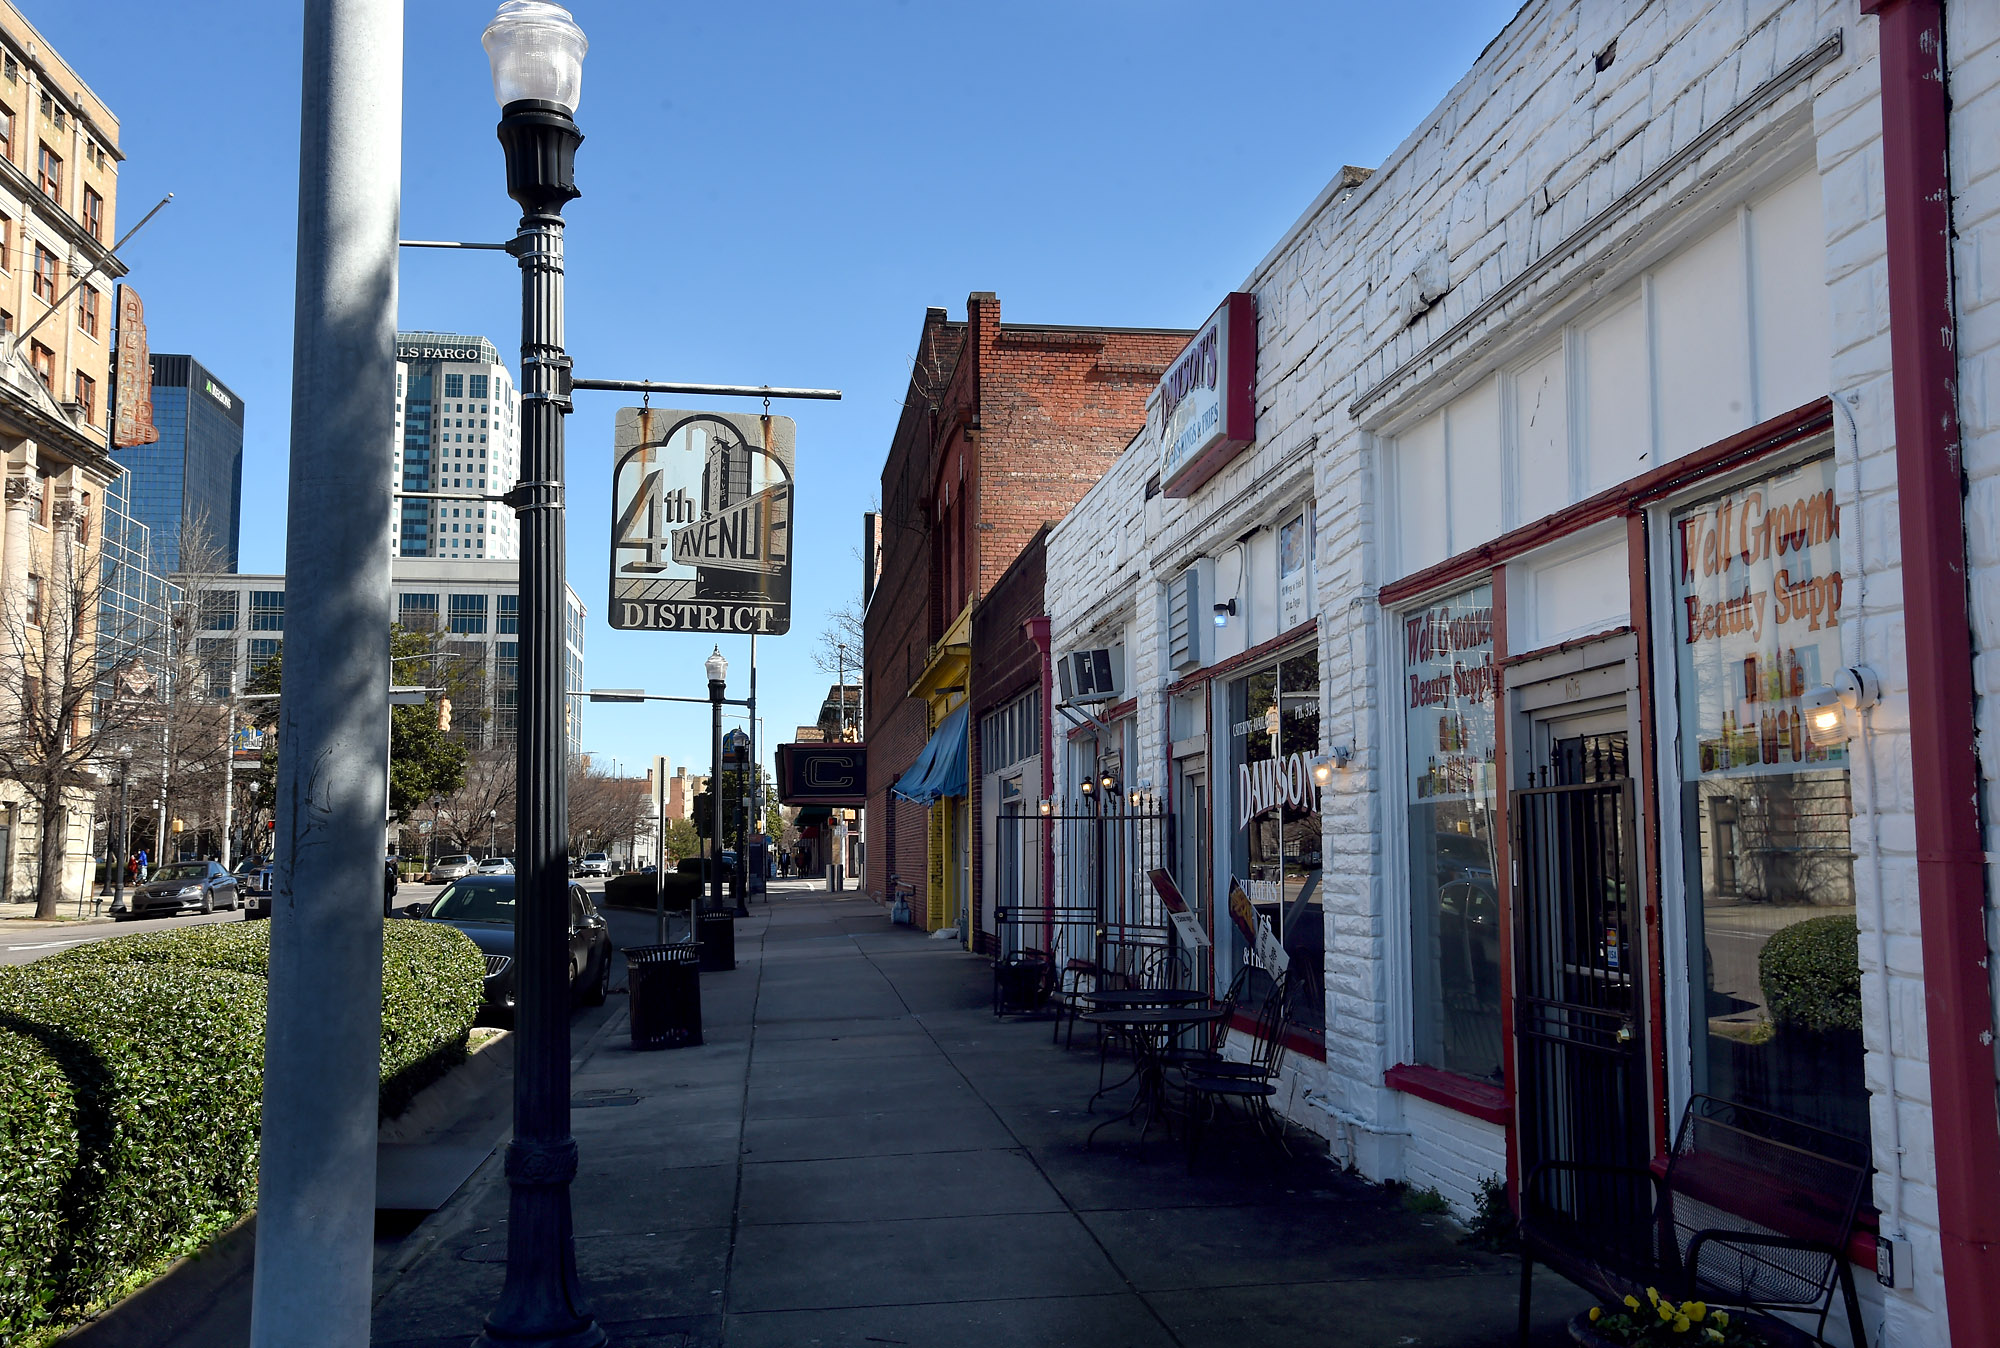 Historic Fourth Avenue business district tapped for statewide